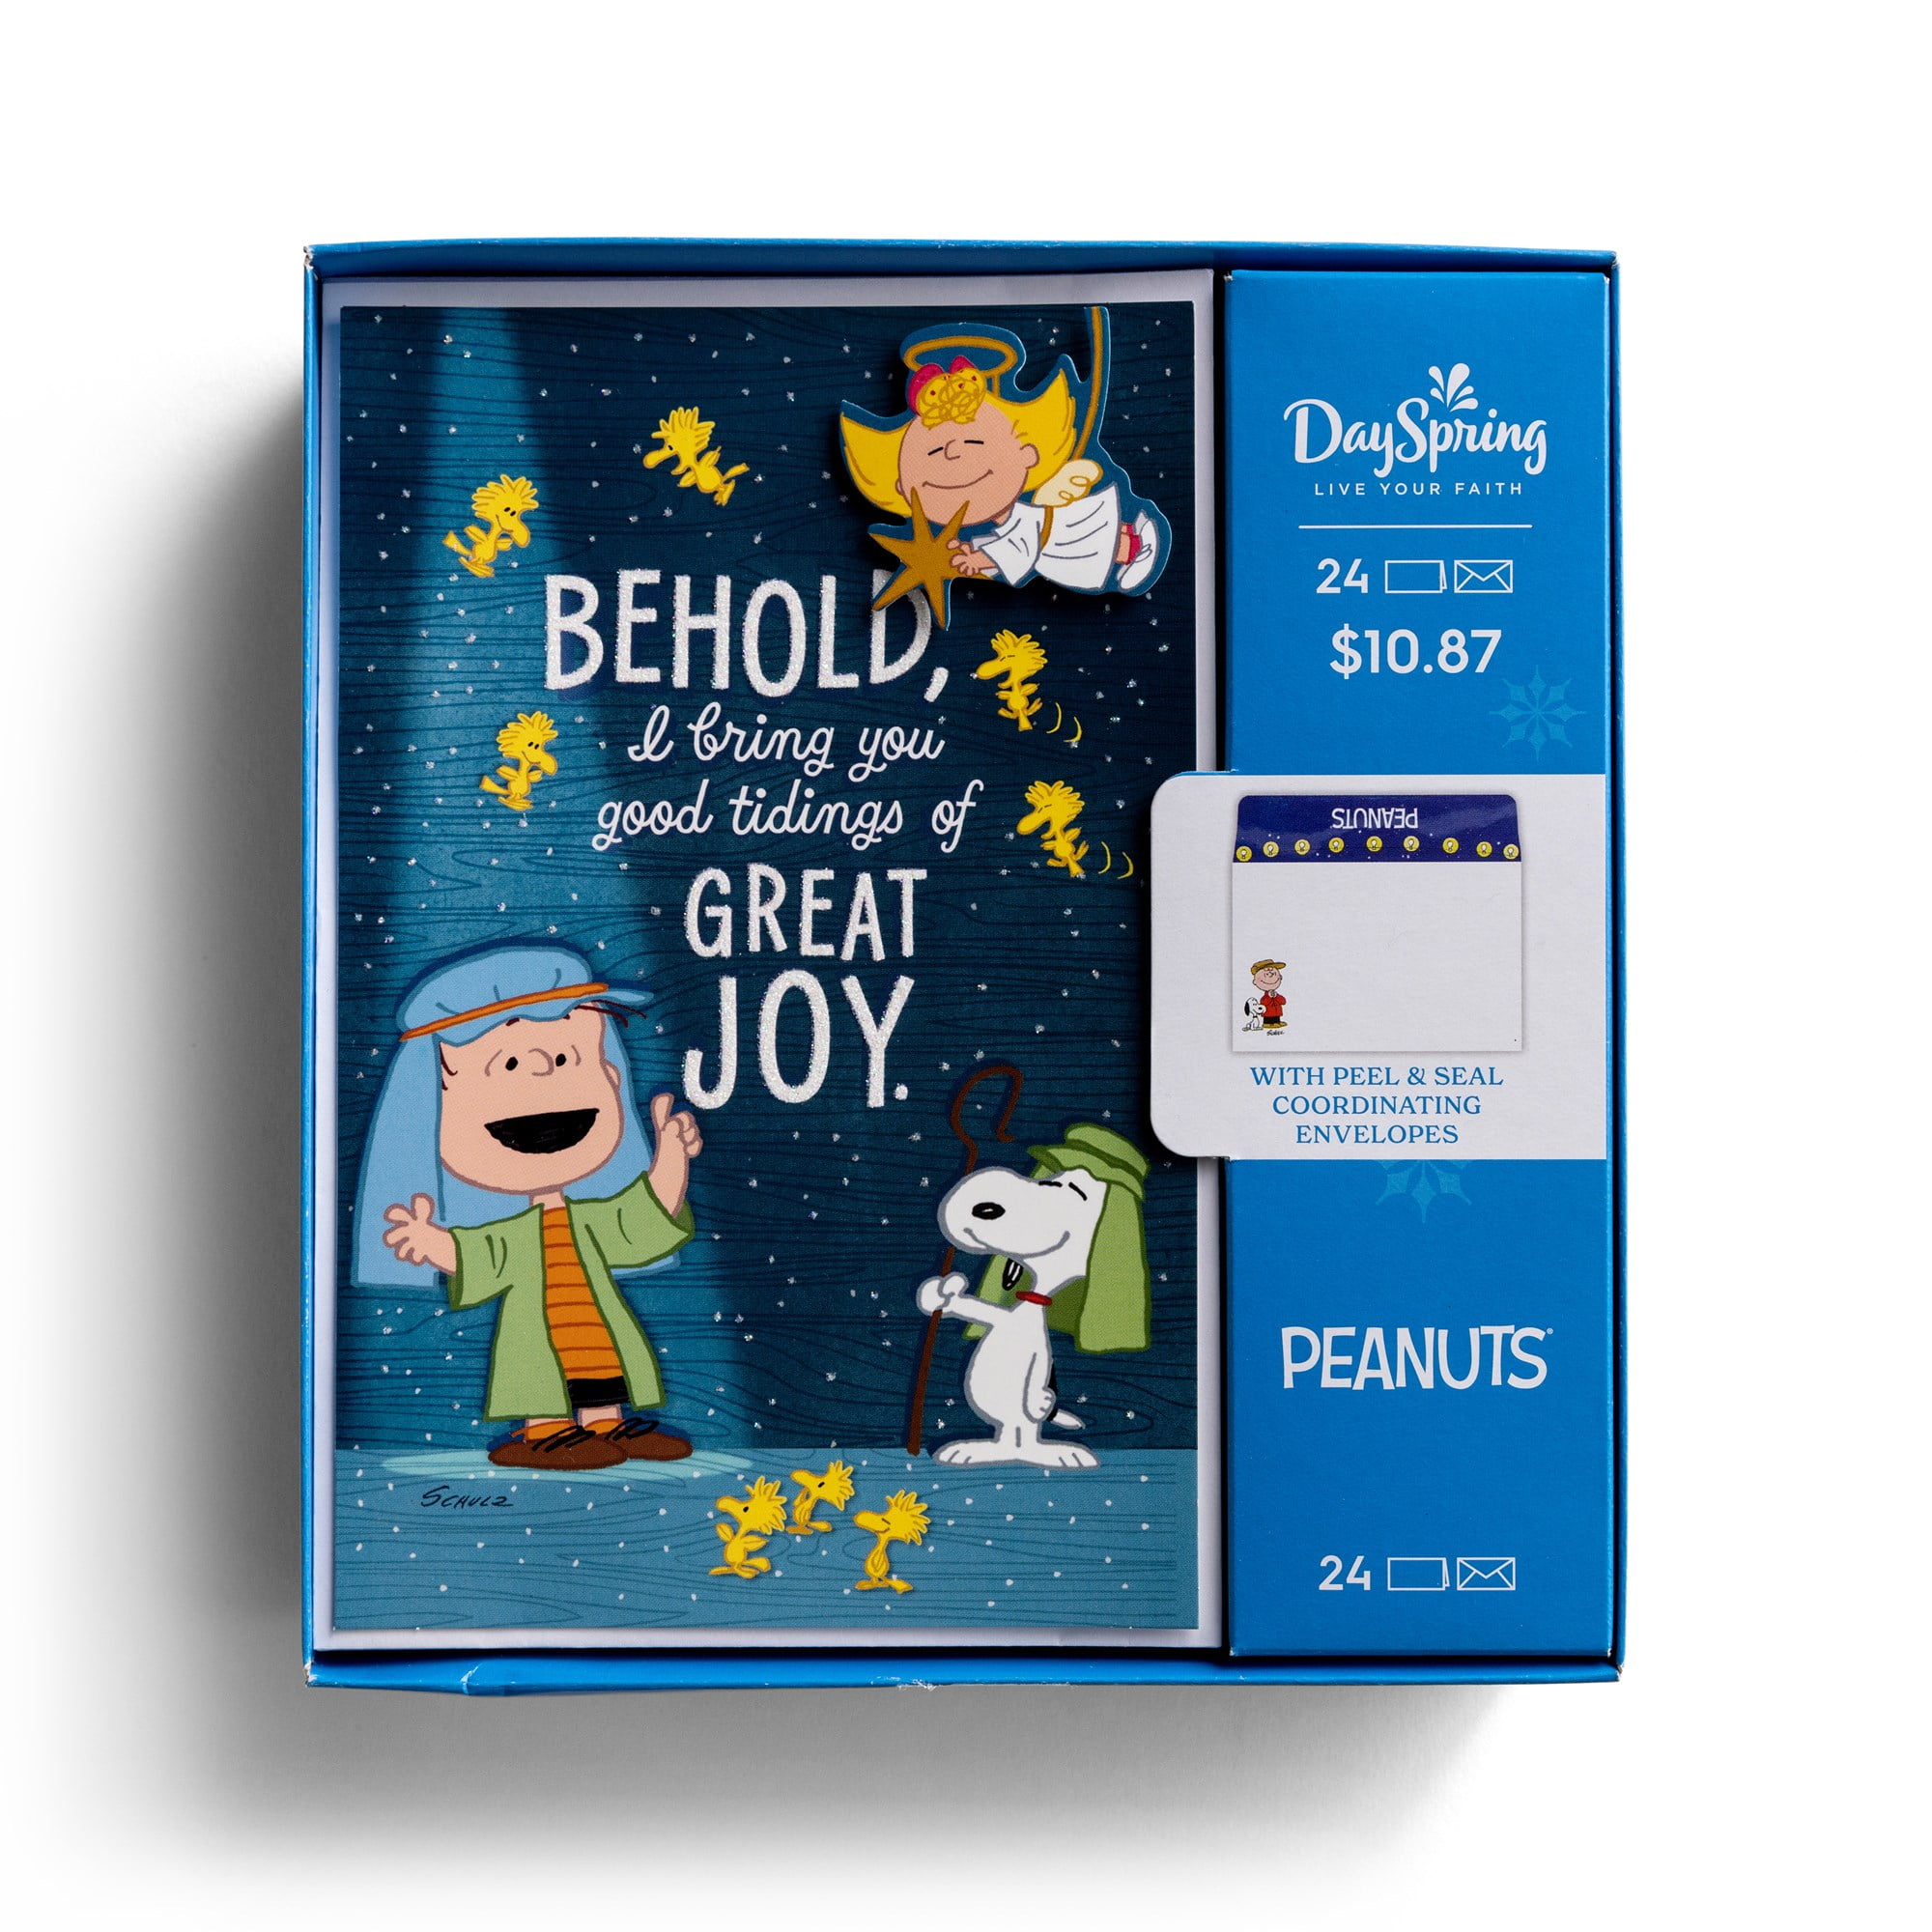 DaySpring 24 Inspirational Christmas Boxed Cards, Peanuts Pageant Linus, Snoopy and Sally, Great Joy, KJV